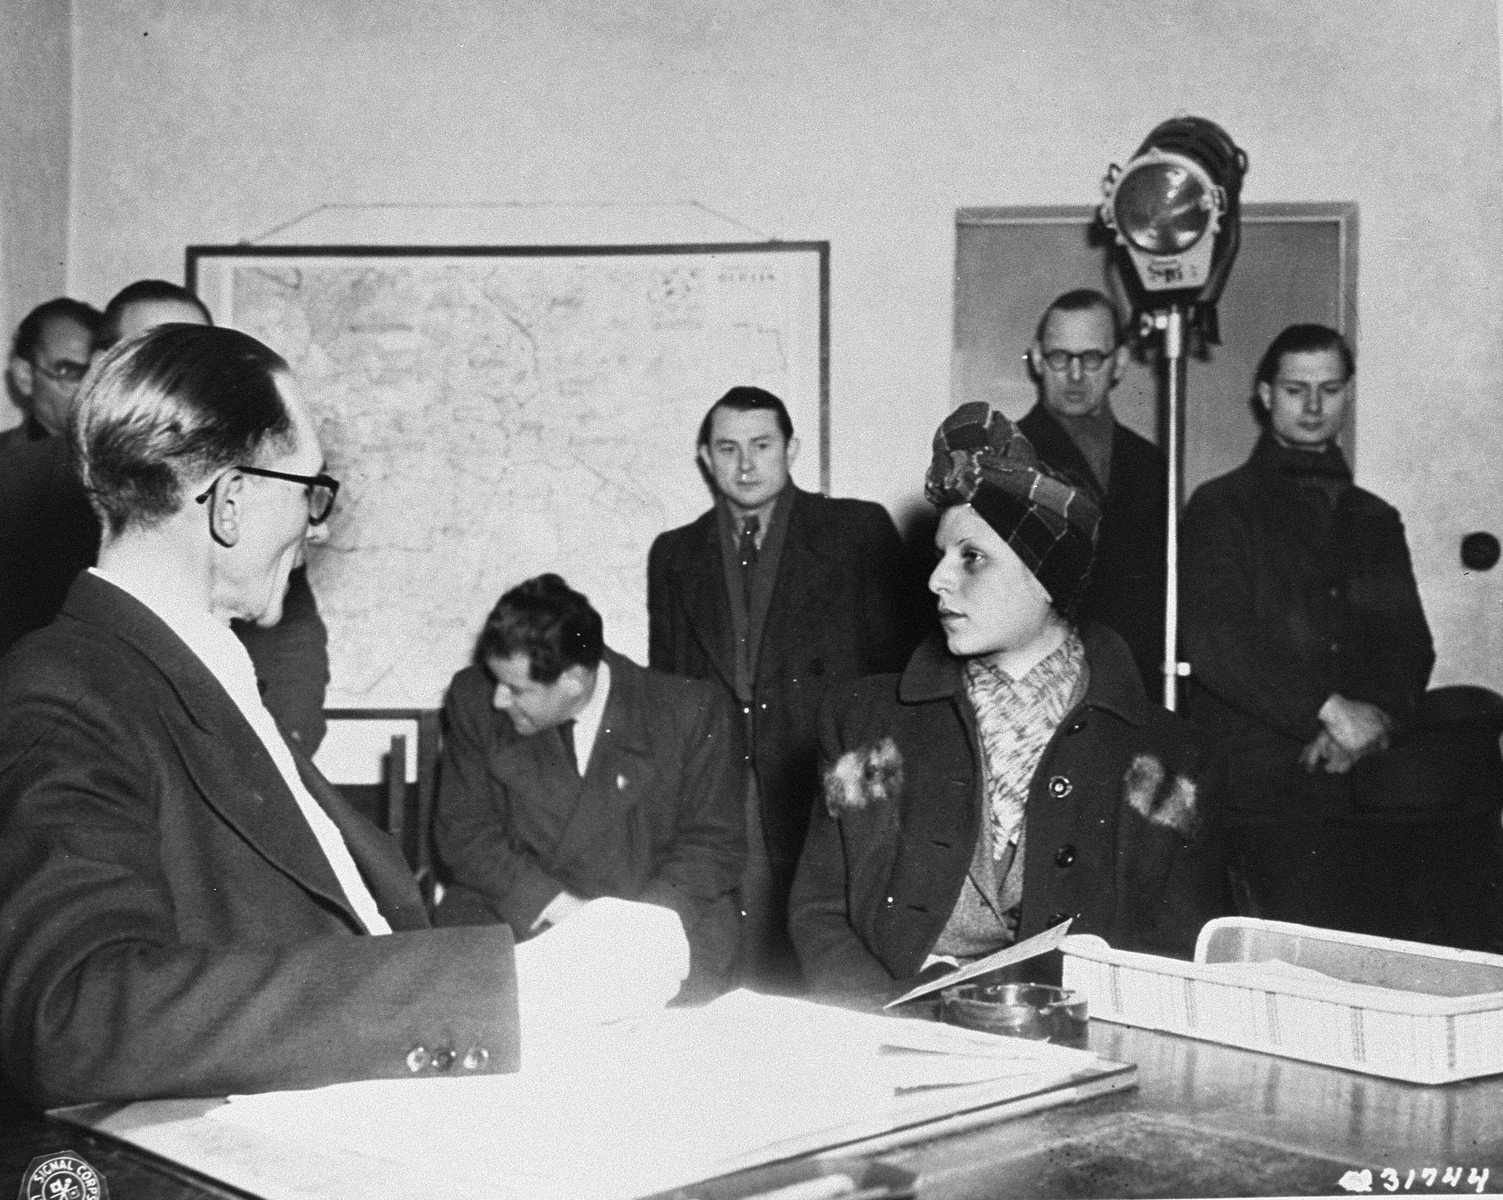 Criminal Commissar Jean Blome questions Stella Kubler (alias Issakson) about her wartime activities in Berlin denouncing Jews to the Gestapo.  

According to the Berlin prasidium court, Kubler informed on 2000 Jews while living in the city with her companion Rolf Isaakson.  The persons standing in the background are witnesses from the Jewish community of Berlin.